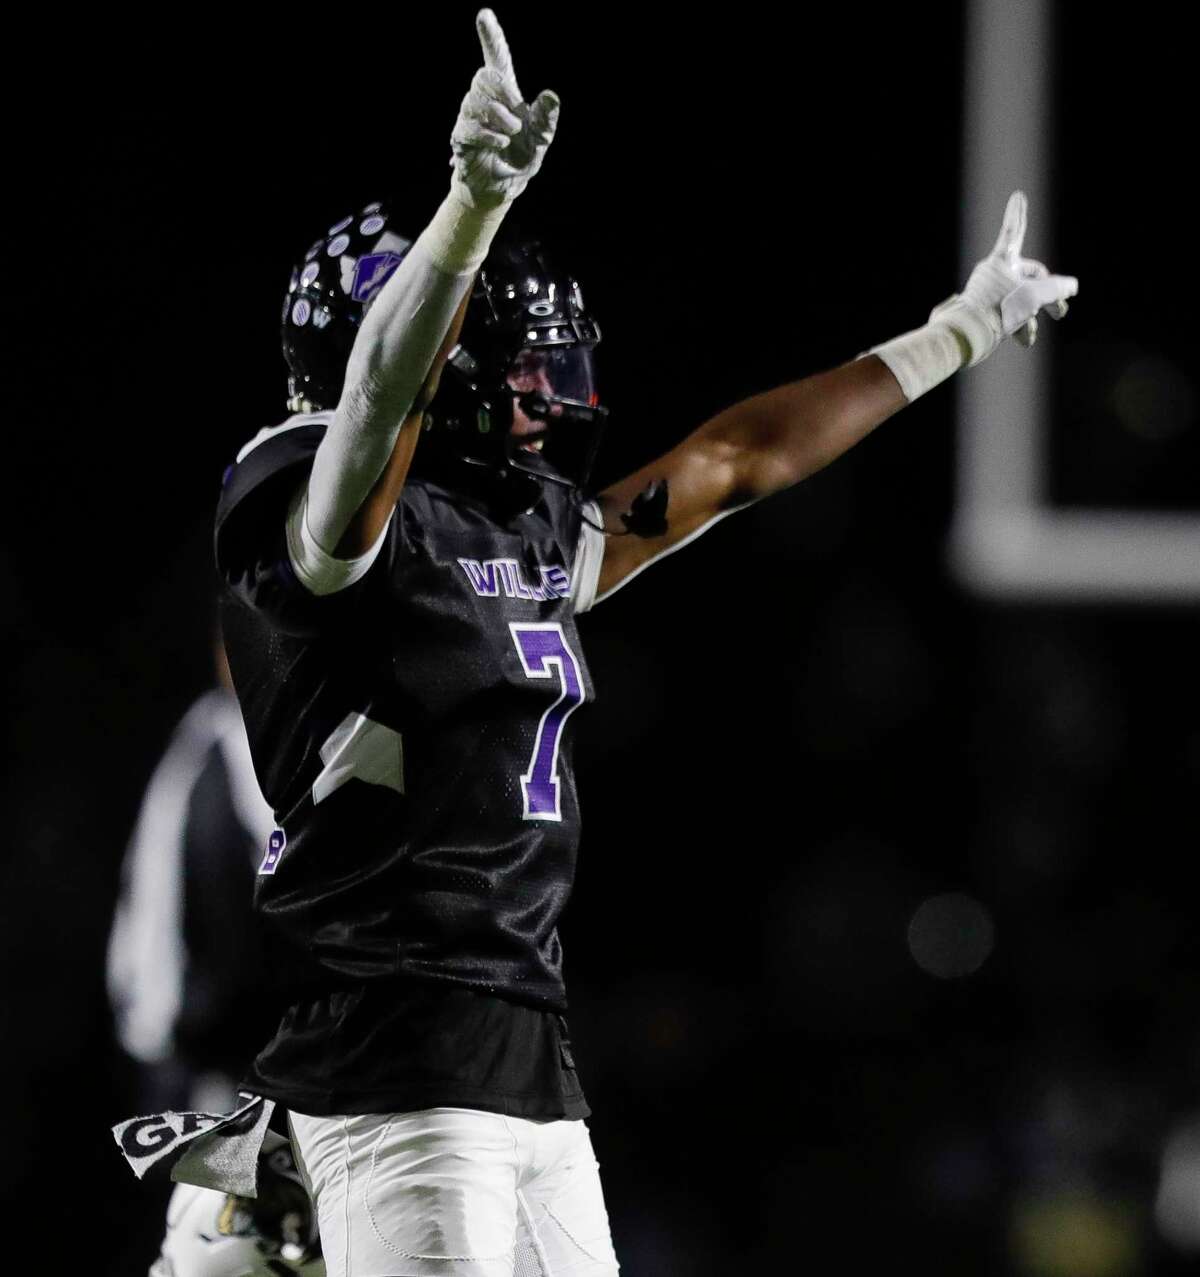 Willis defensive back Jadarius Brown (7) reacts after breaking up a pass intended for Conroe wide receiver Trashaun Kindle (2) during the first quarter of a District 13-6A high school football game, Friday, Nov. 5, 2021, in Willis.